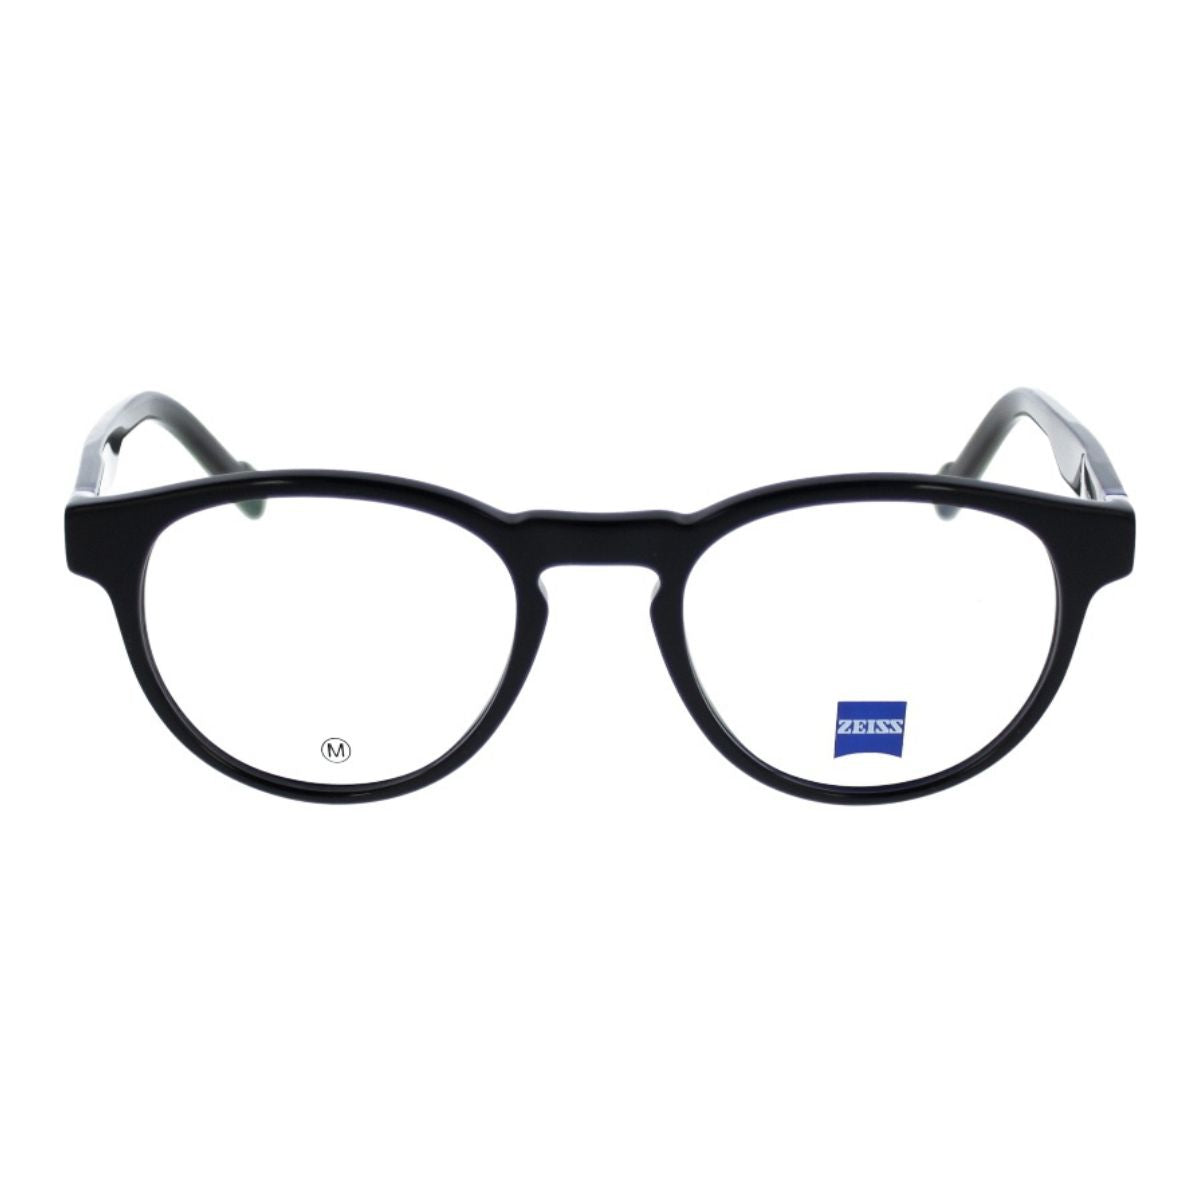 " stylish Zeiss 23535 001 oval shape eyeglasses frame for men's and women's at optorium"